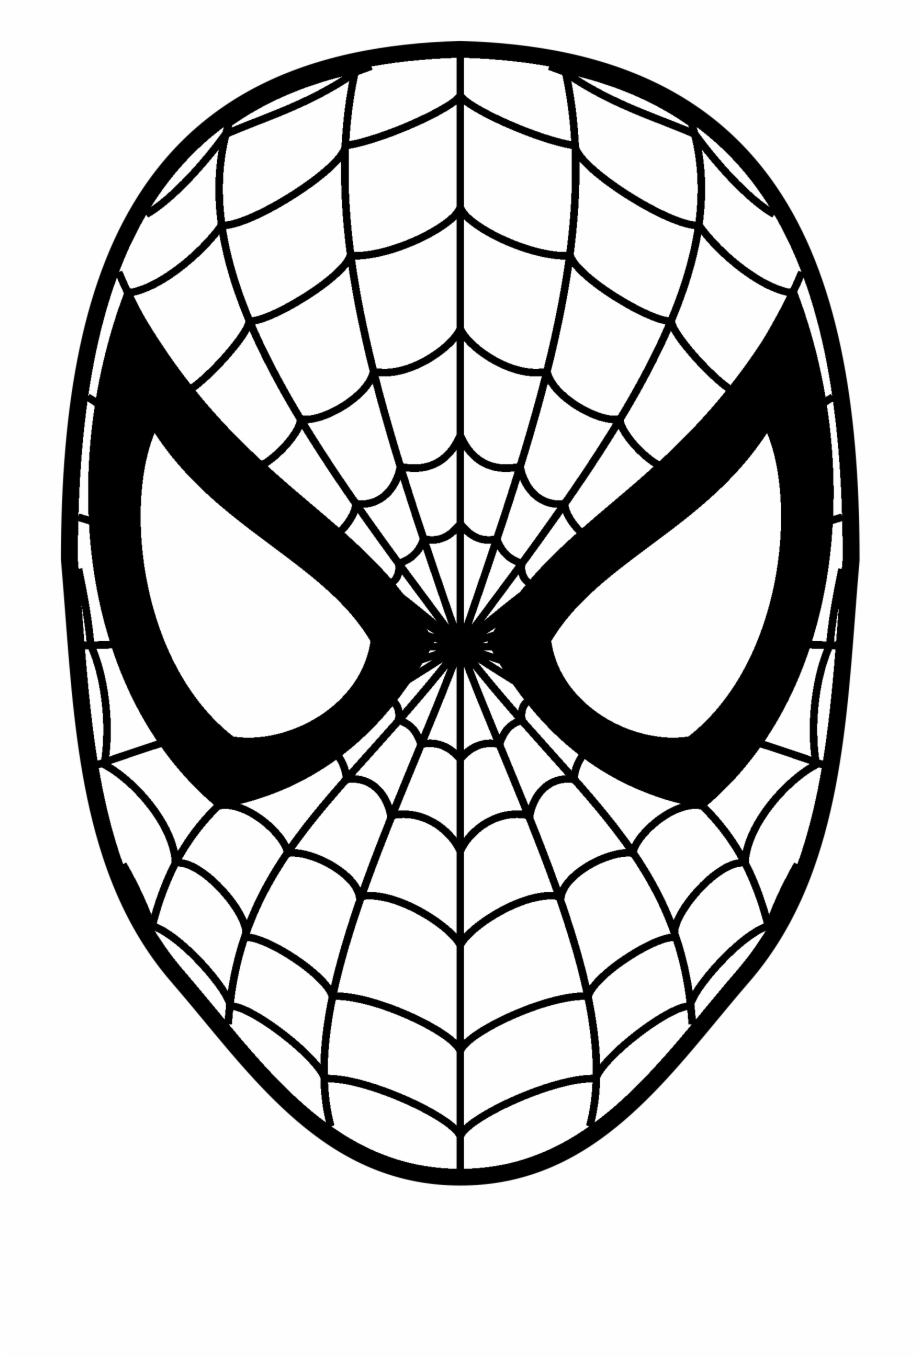 Spider man clipart face pictures on Cliparts Pub 2020! 🔝